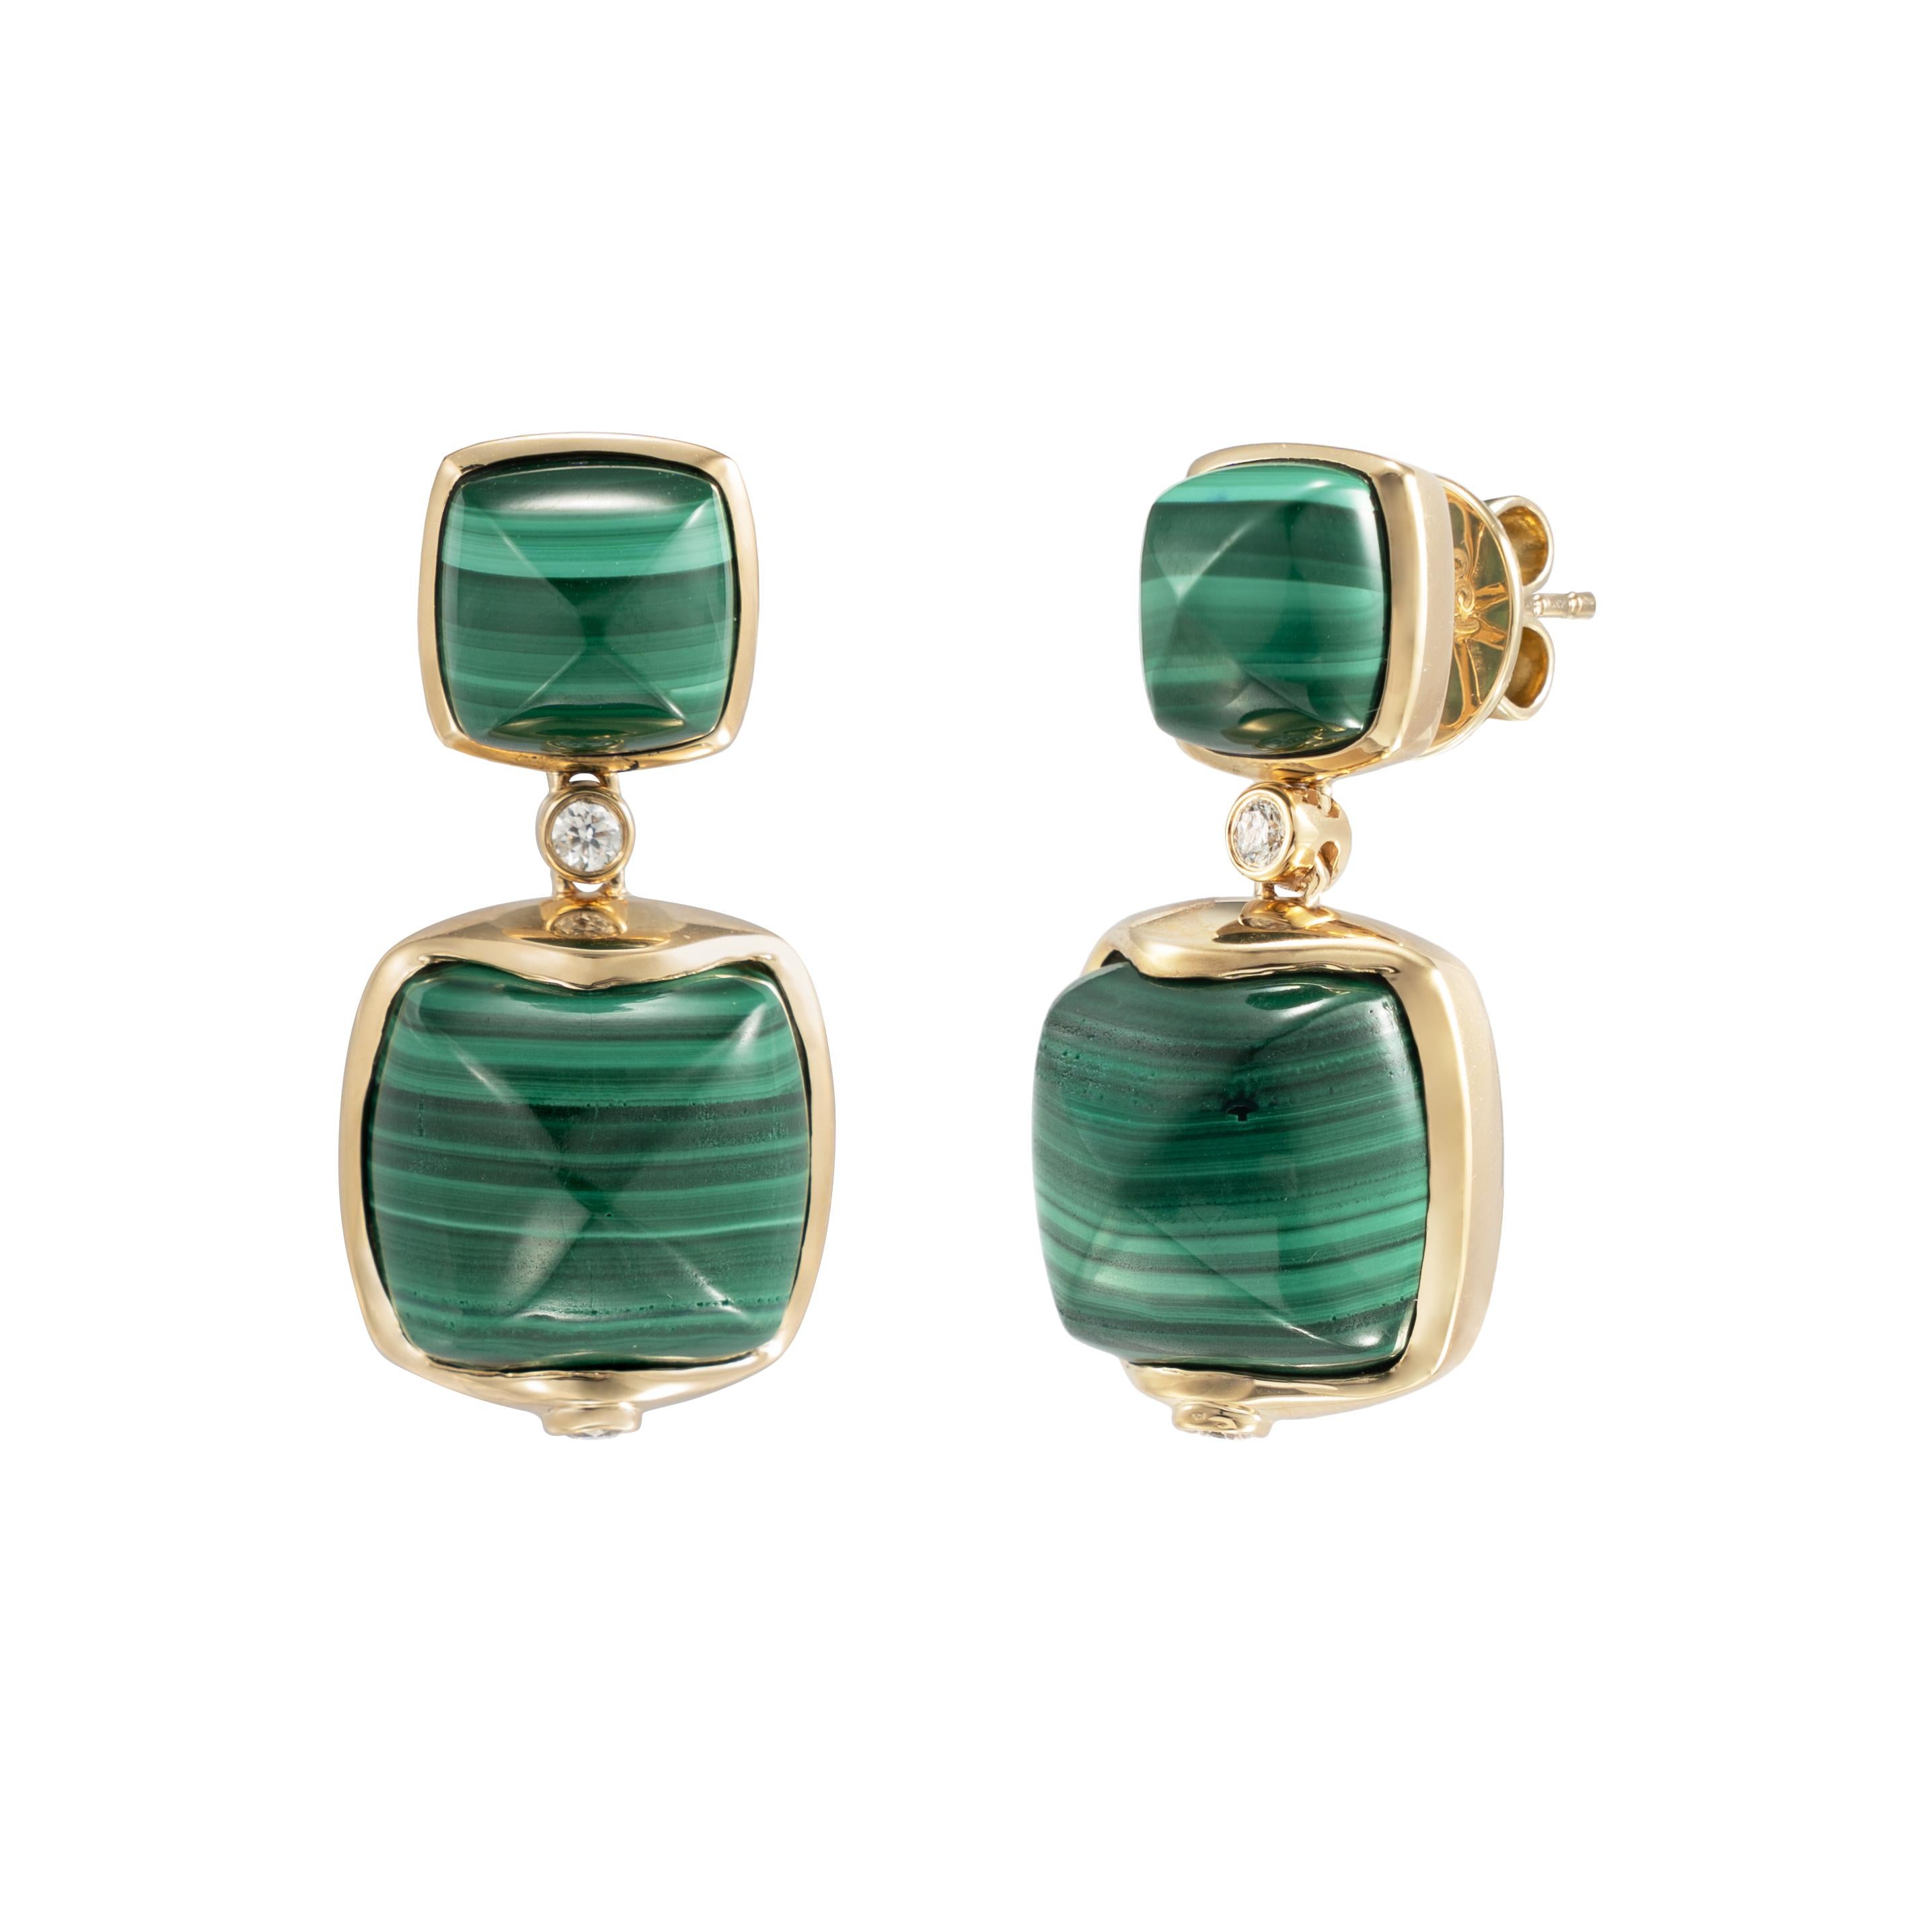 Sweet Sugarloaves! Light and easy to wear these earrings showcase beautiful sugarloaf gemstones accented with a gold frame and diamonds. These earrings are dainty yet have a great pop of color from the vibrant gems.

Malachite Sugarloaf Earrings